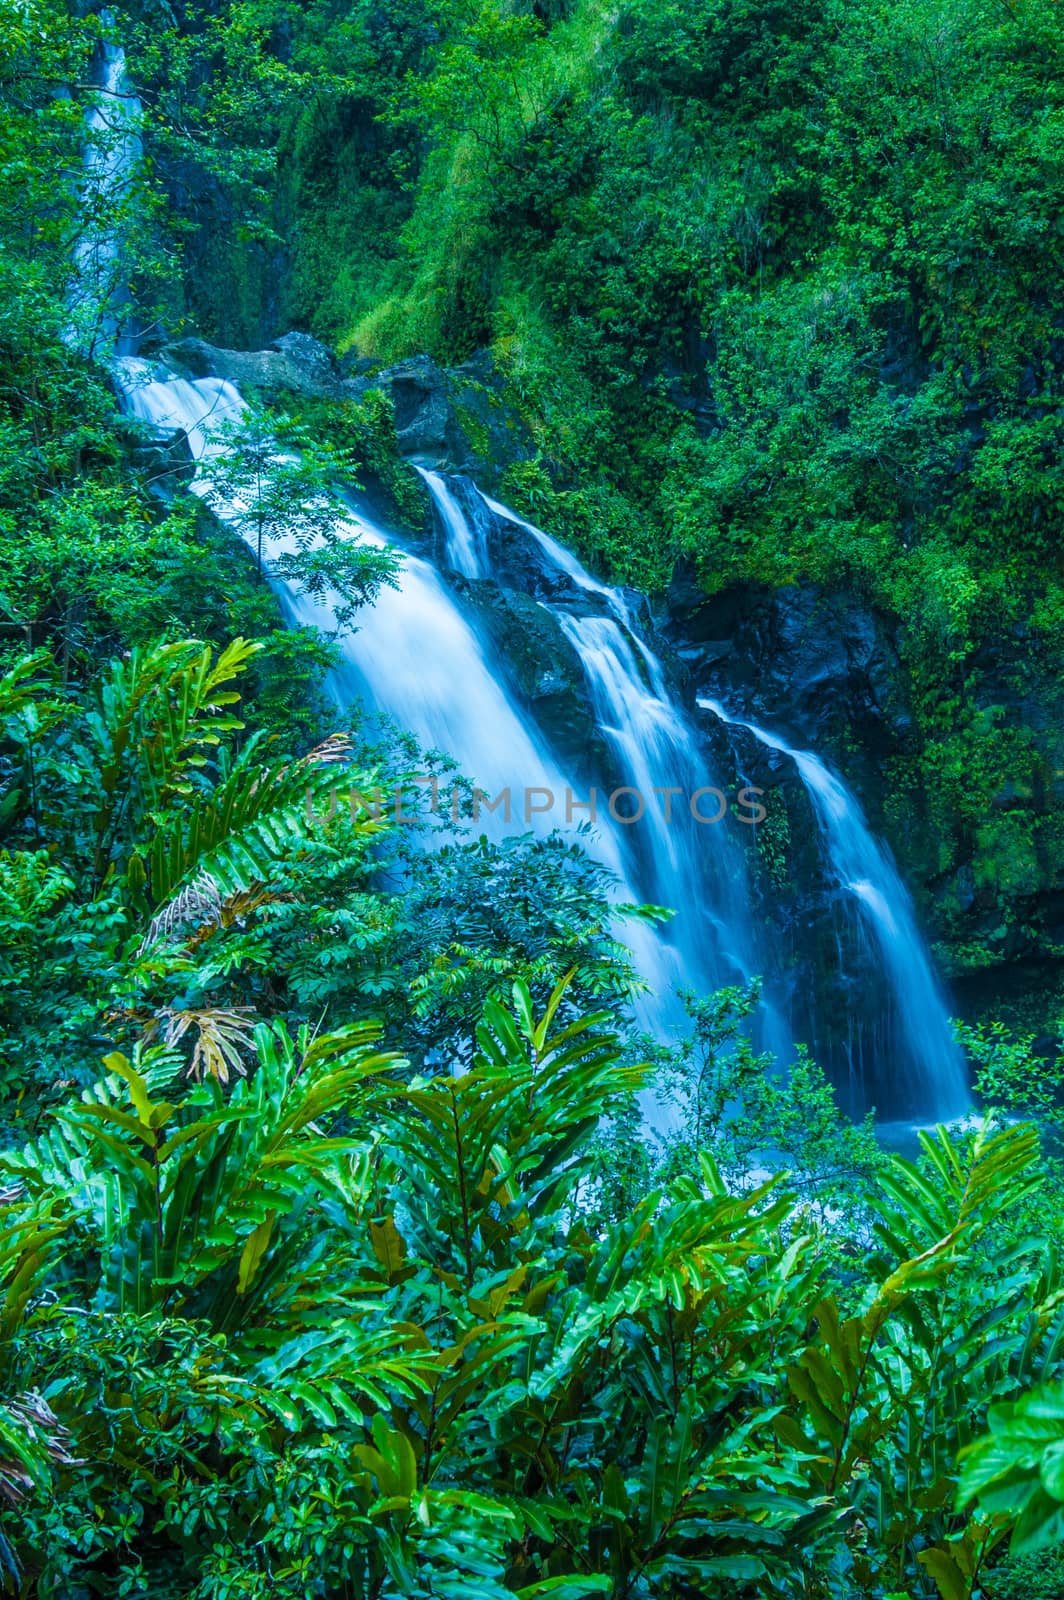 Ther Road to Hana, Maui, Hi, is replete with dozens of picturesque waterfalls